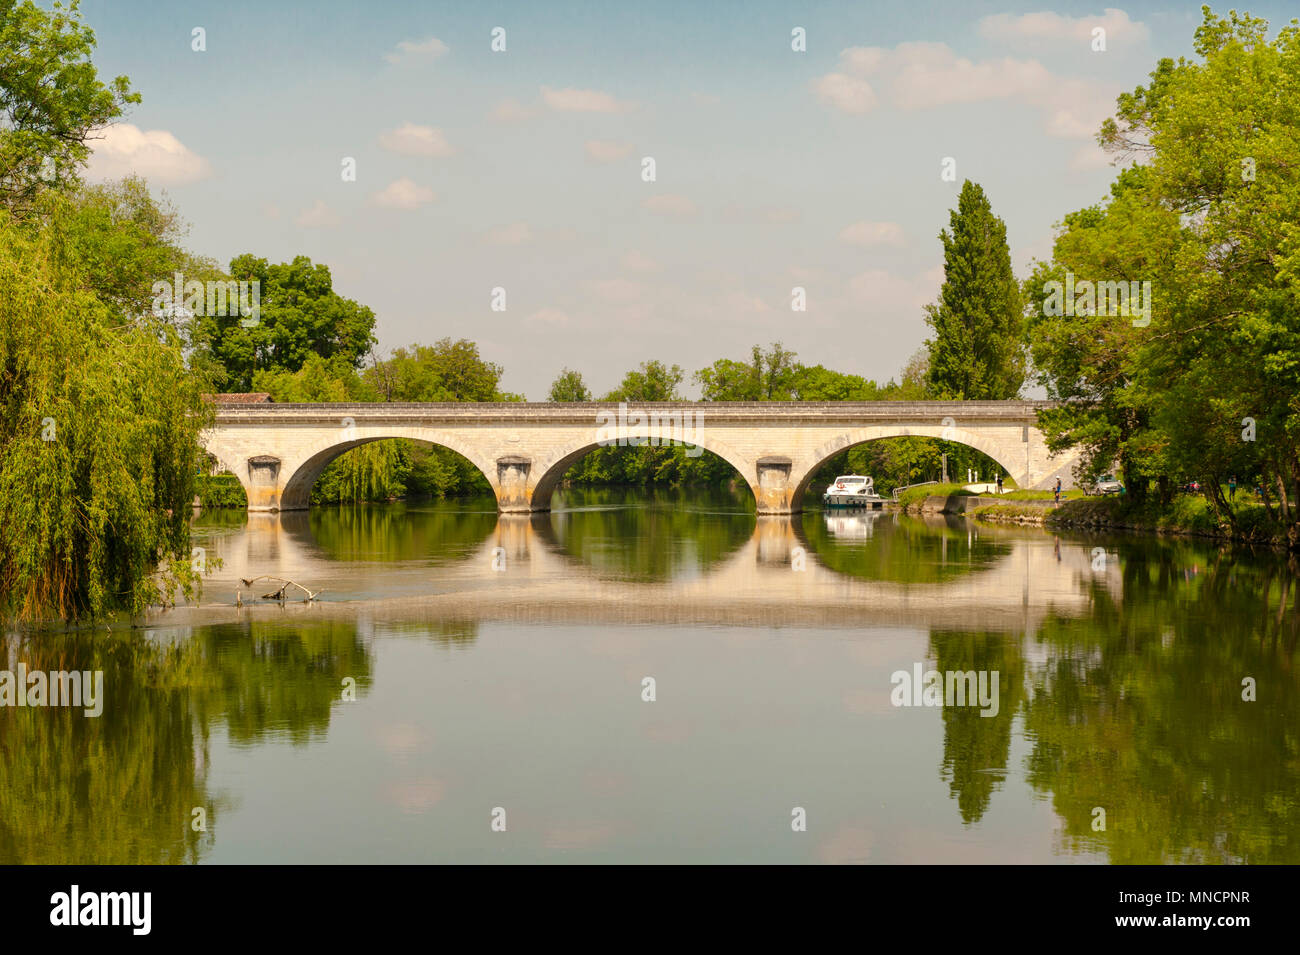 The bridge of Juac reflected by the waters of the Charente river, south-west France Stock Photo